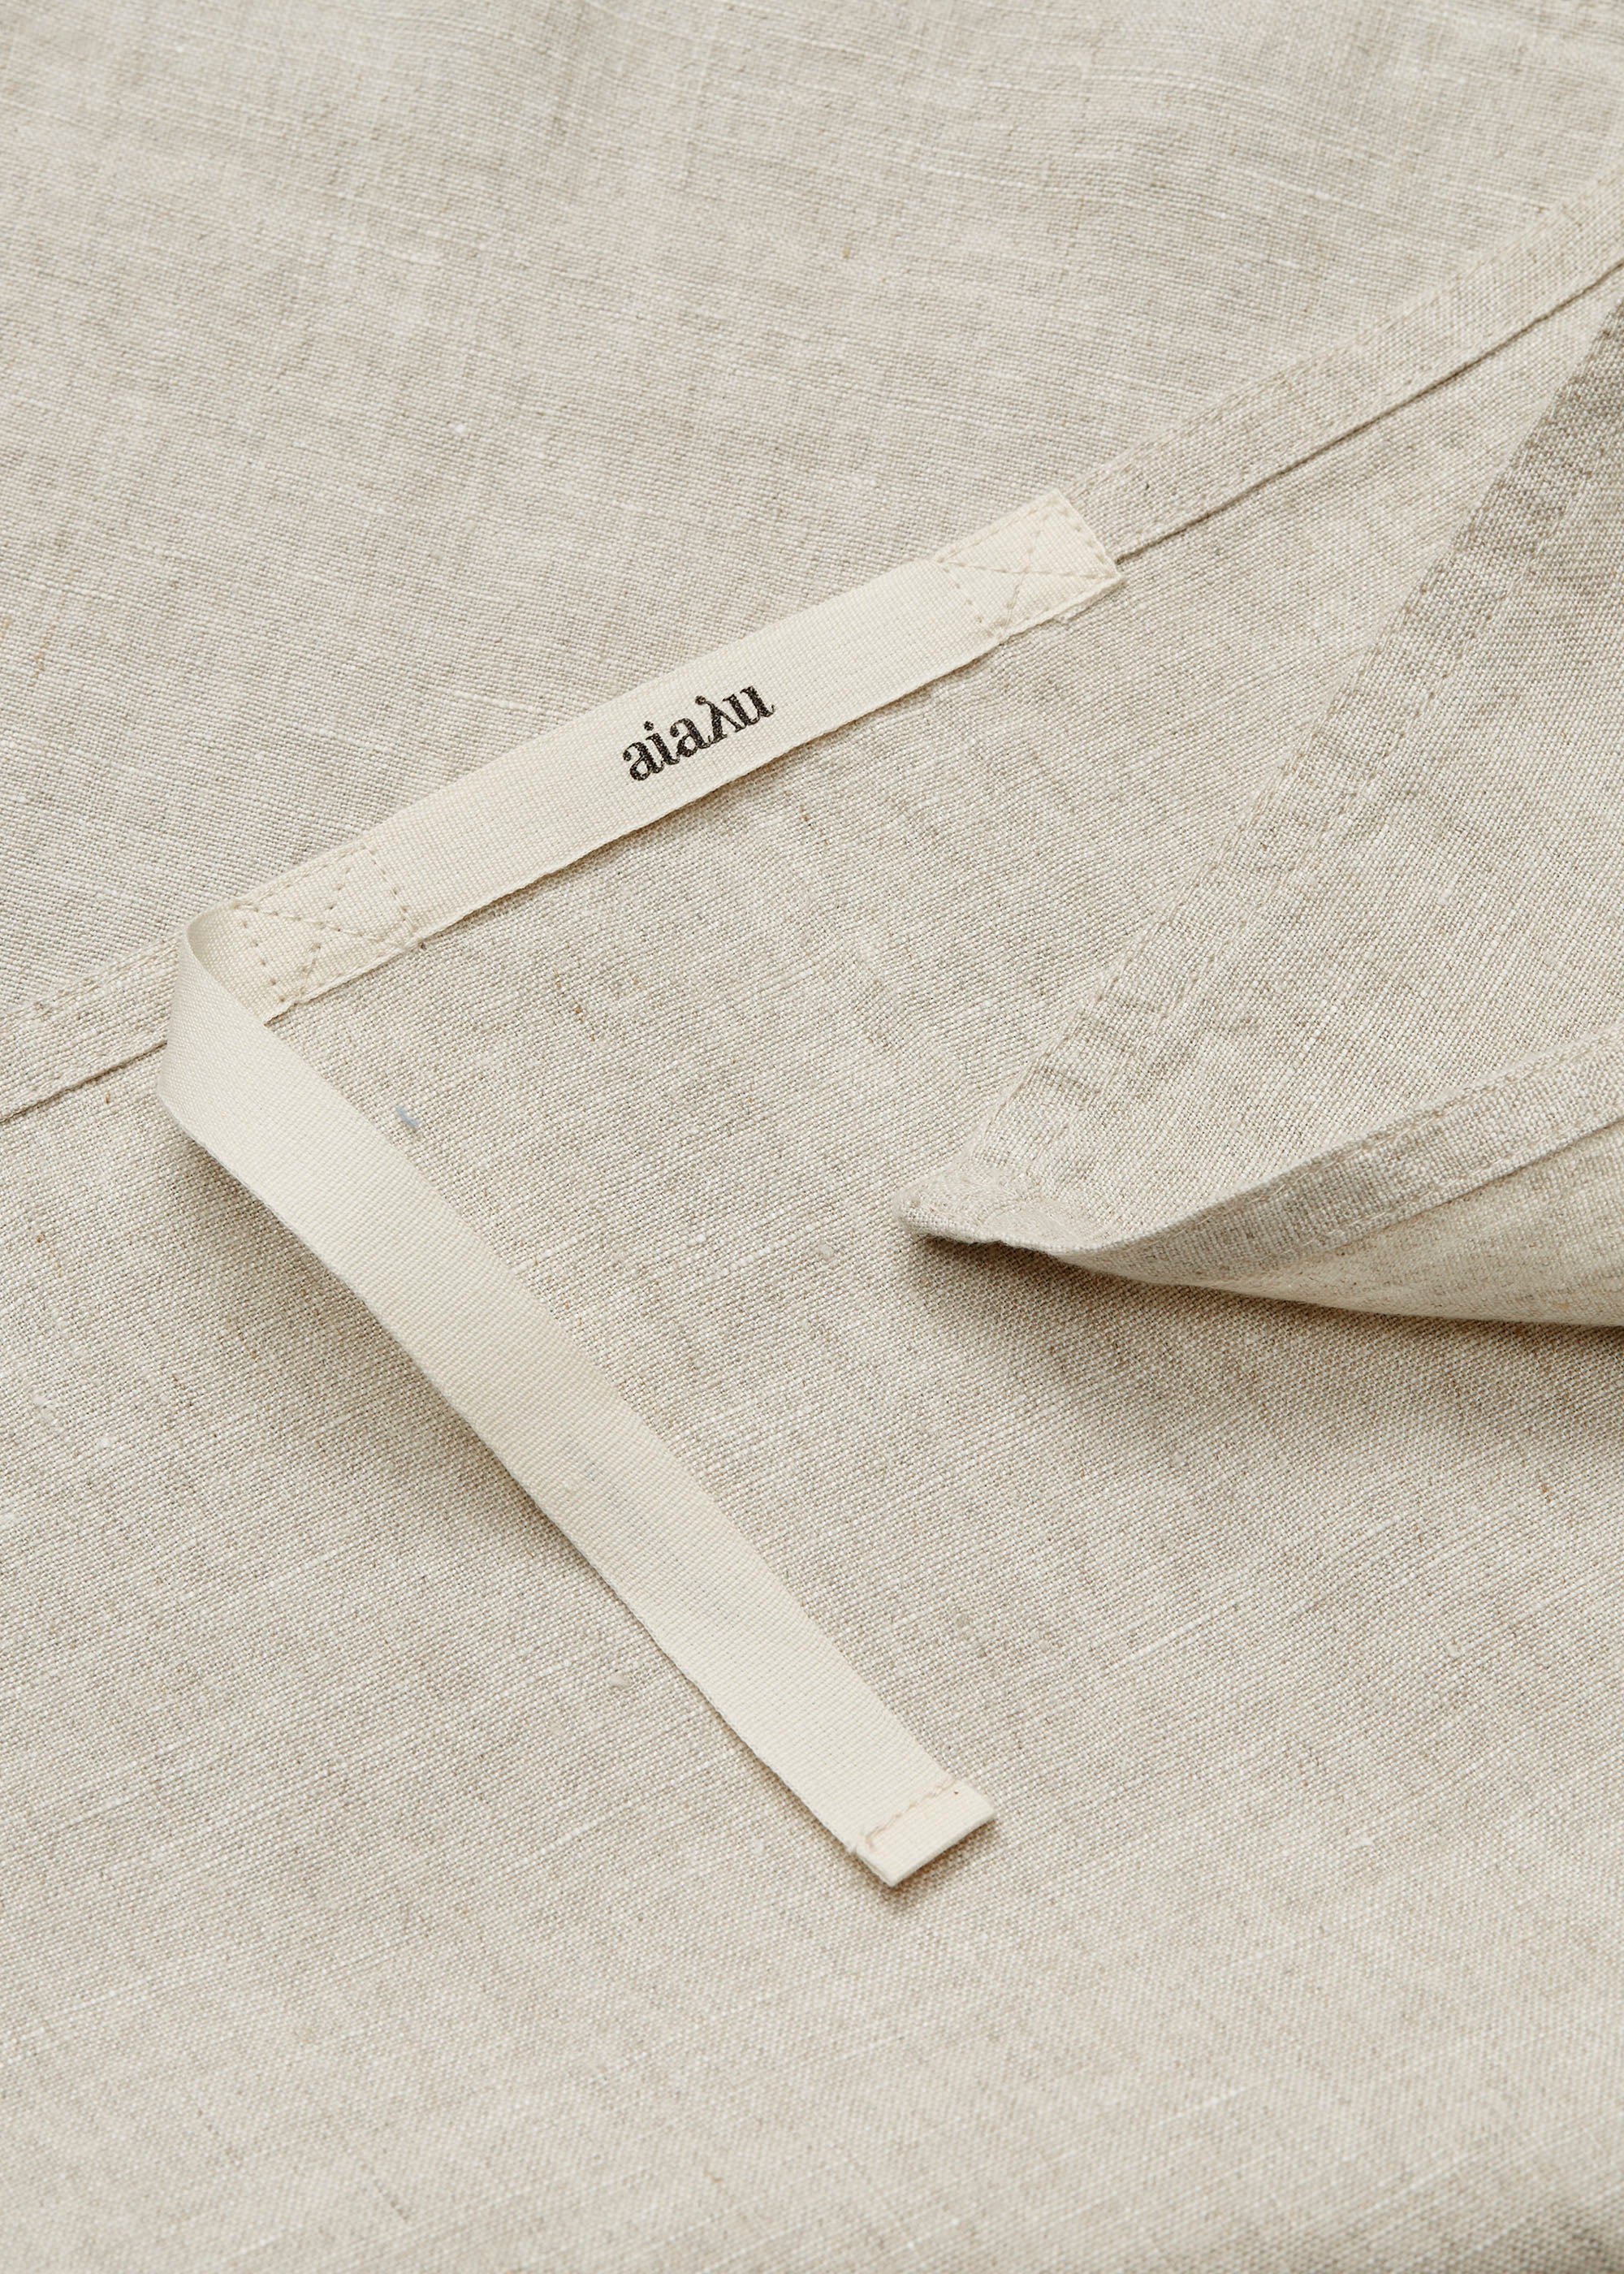 If your chosen colour starts with ‘Pure’ the material is 100% natural and undyed.